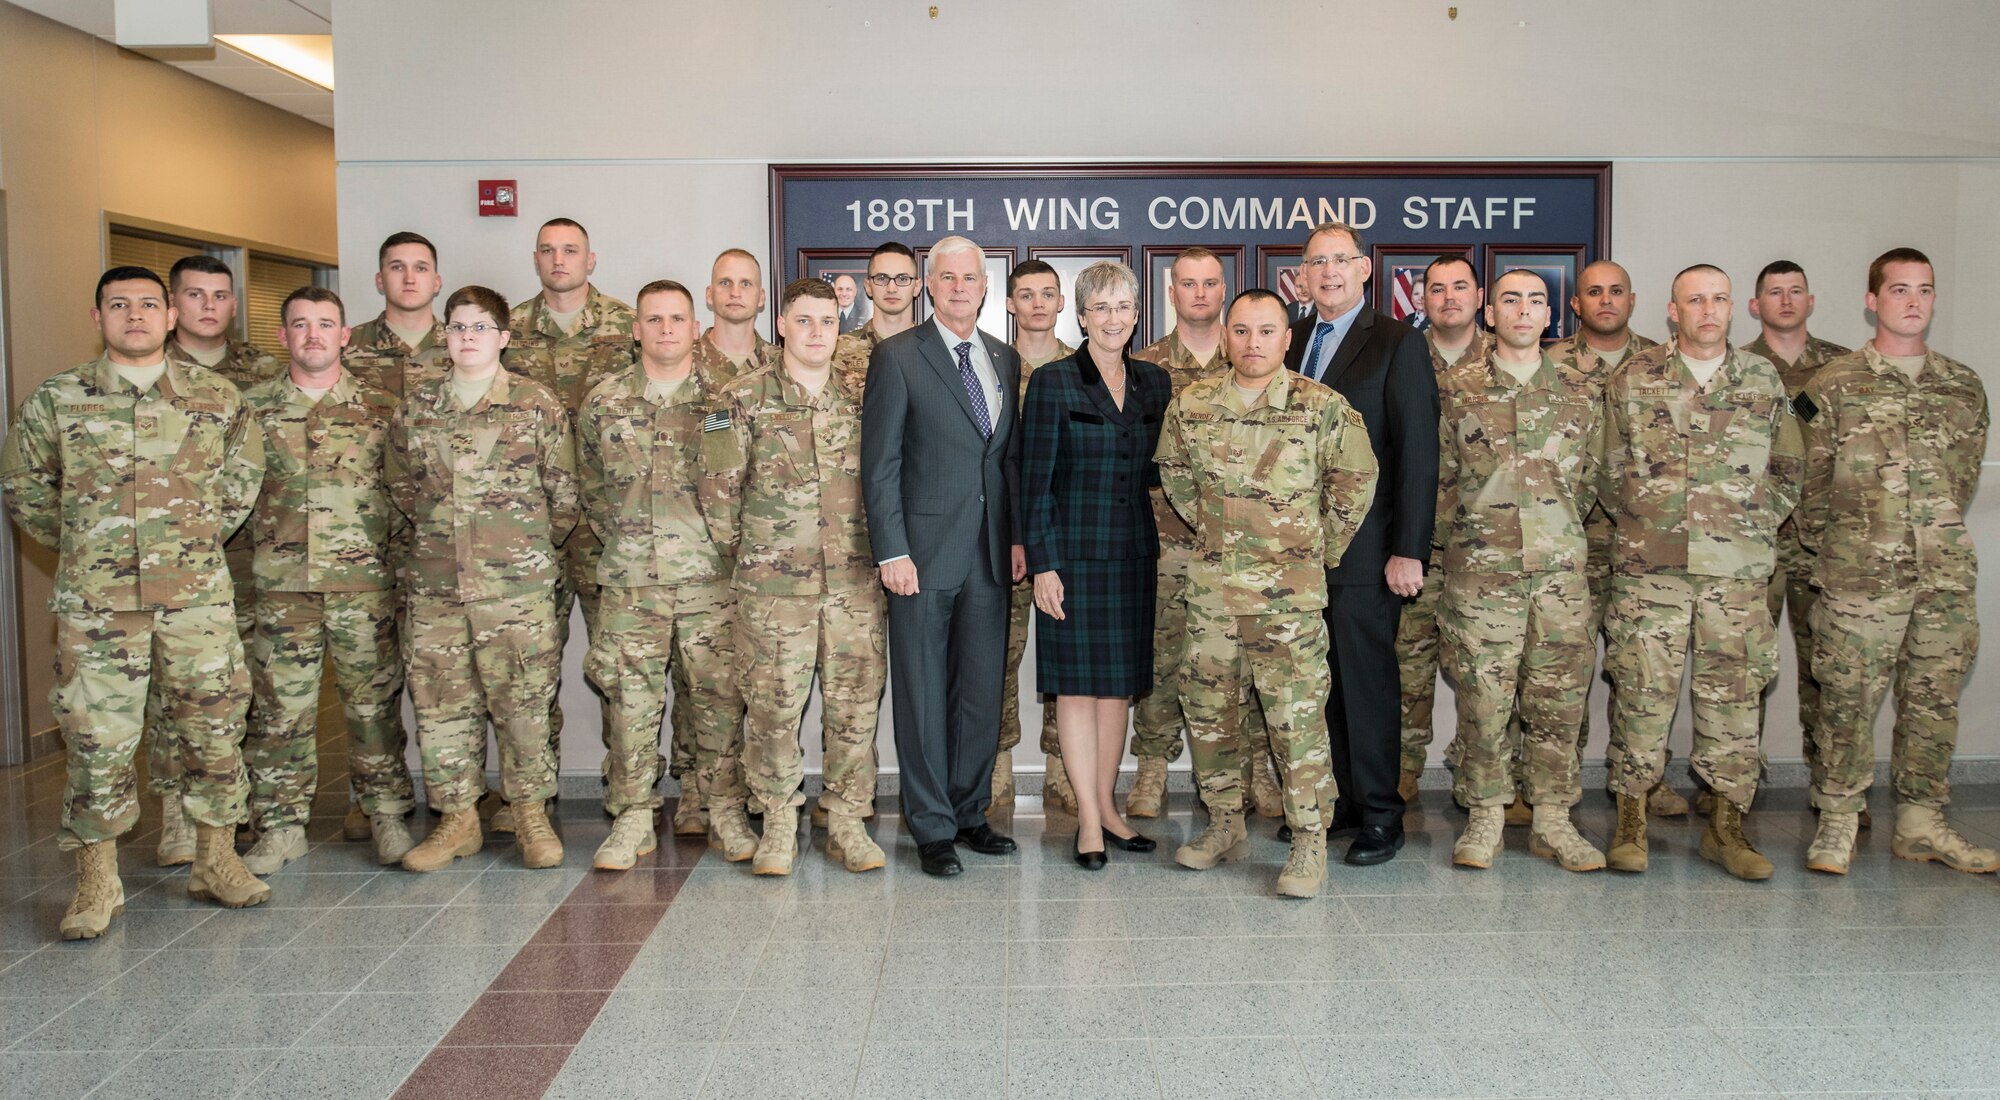 Members of the 188th Security Forces Squadron take a photo with Secretary of the Air Force Dr. Heather Wilson prior to deployment at Ebbing Air National Guard Base, Fort Smith, Ark., Mar. 26 , 2018.   The 188th Defenders  will be deploying in support of Operation Freedom's Sentinel, as part of the Air National Guard's federal mission to provide support during wartime operations.  (U.S. Air National Guard photo by Senior Airman Matthew Matlock)